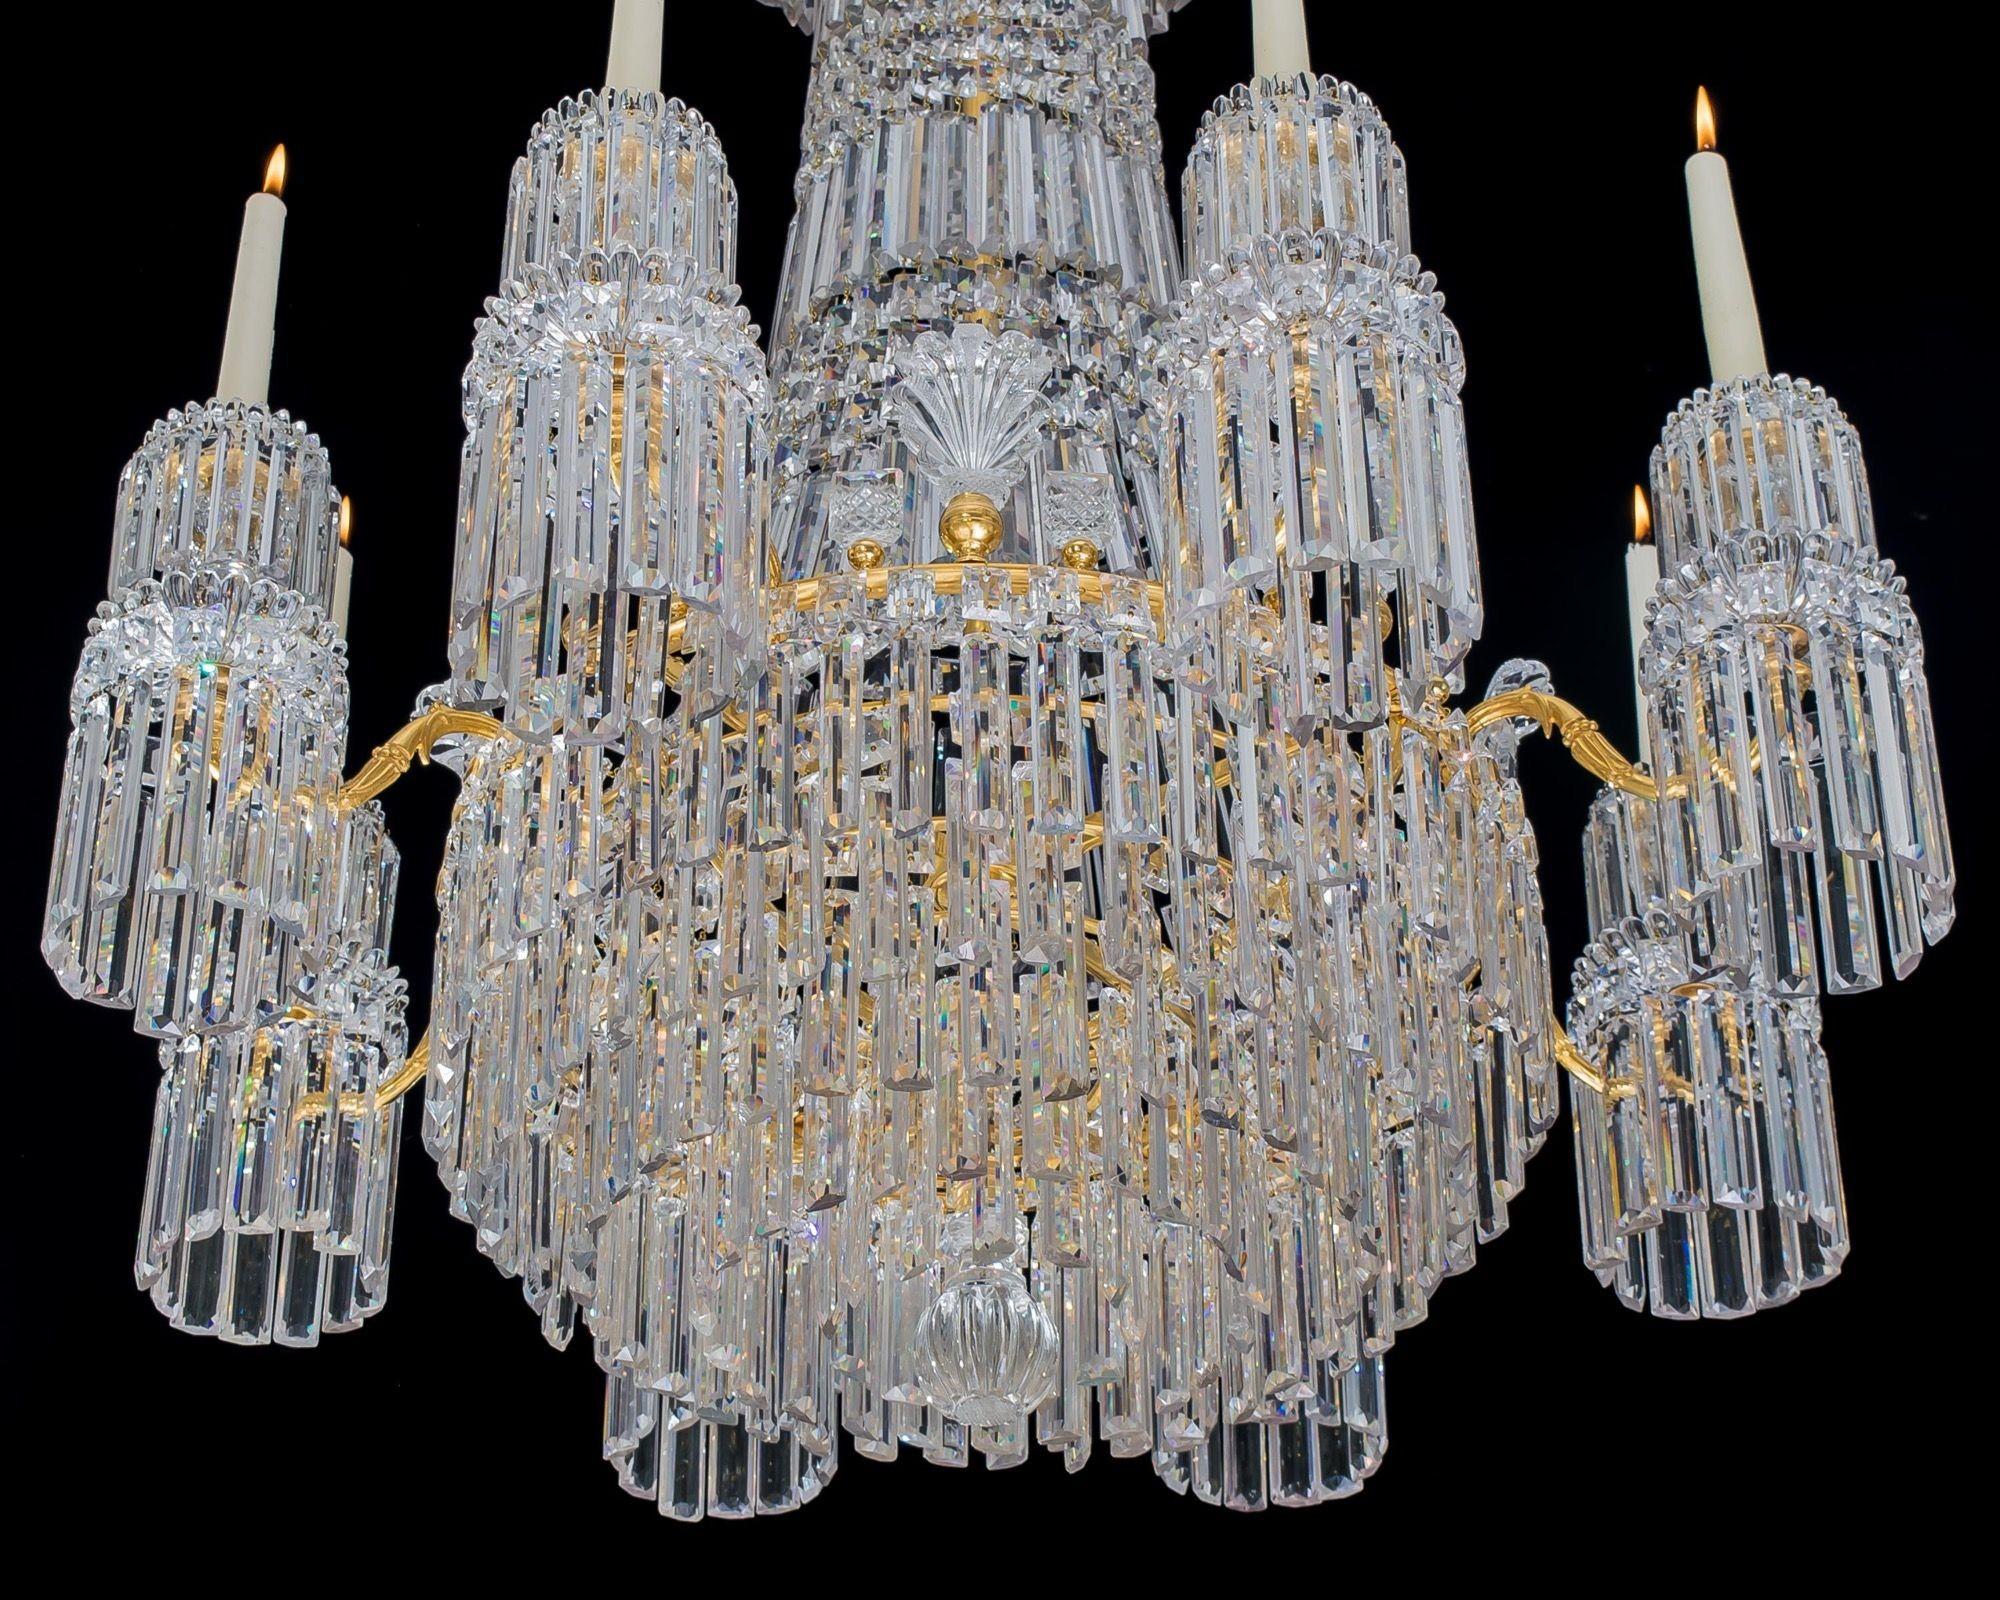 A Eight Light Regency Chandelier By John Blades In Good Condition For Sale In Steyning, West sussex